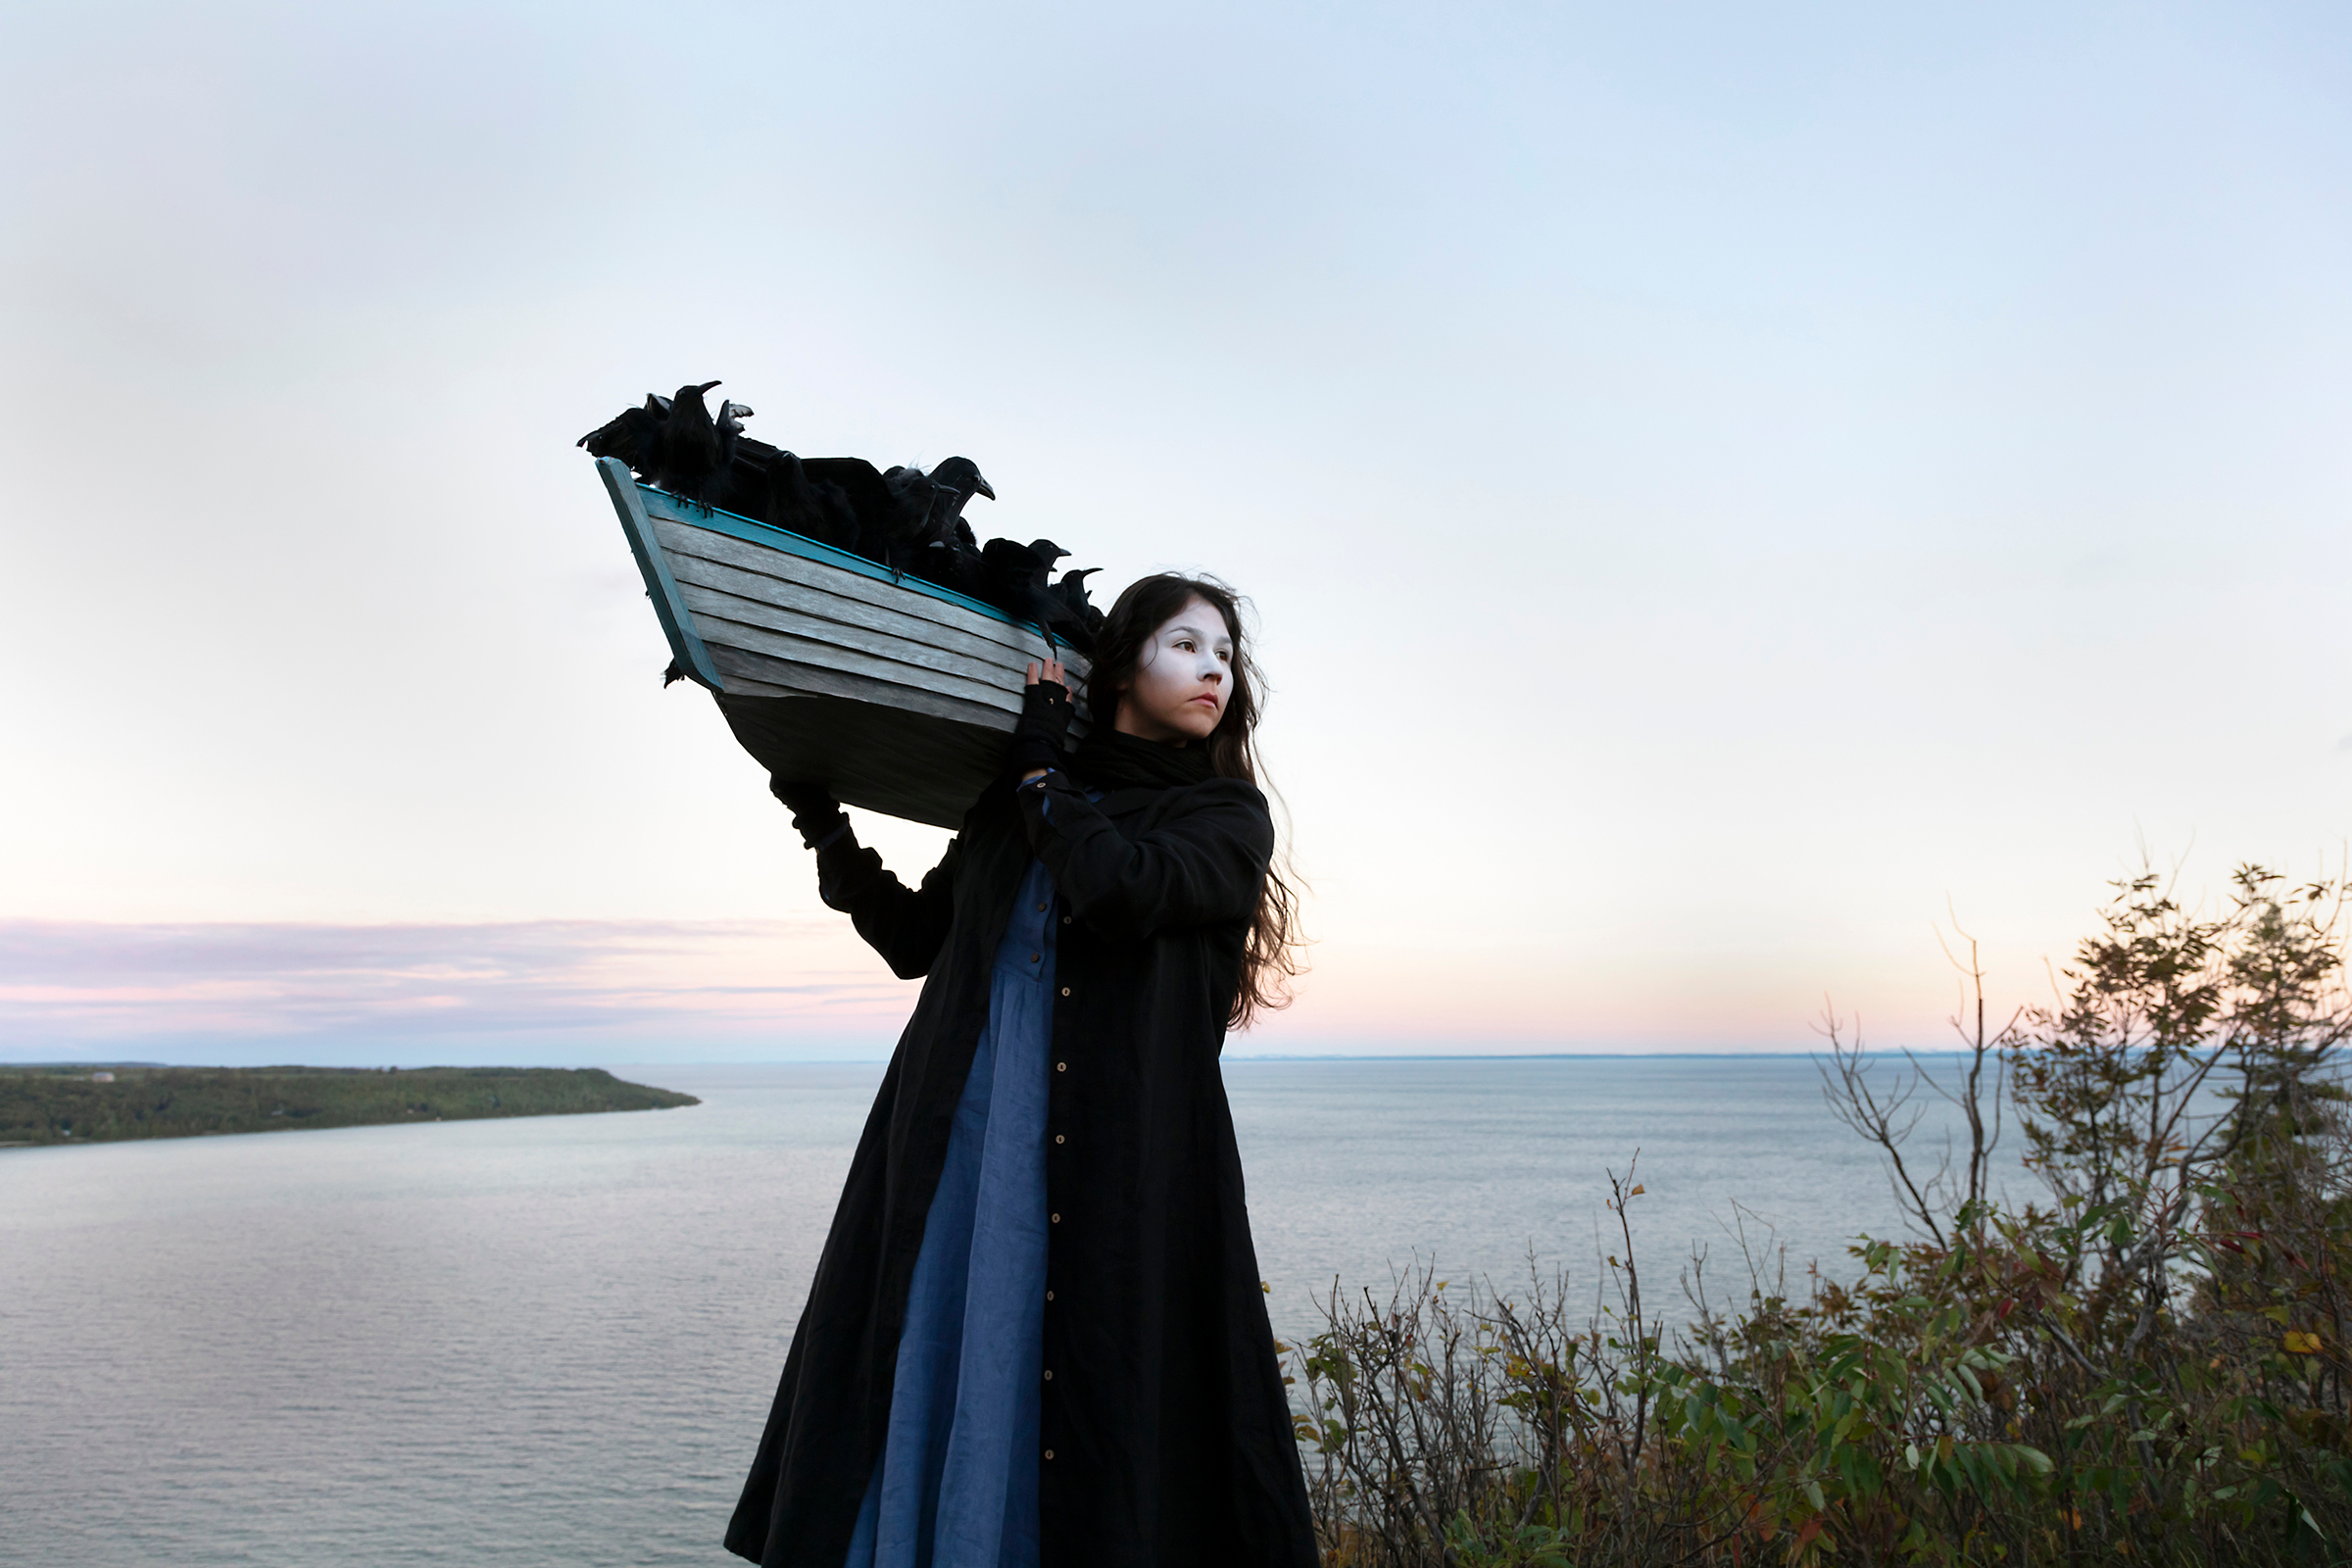     Meryl McMaster, On The Edge of This Immensity, 2019. From the series As Immense as the Sky. Courtesy of the artist, Stephen Bulger Gallery and Pierre-François Ouellette art contemporain.

